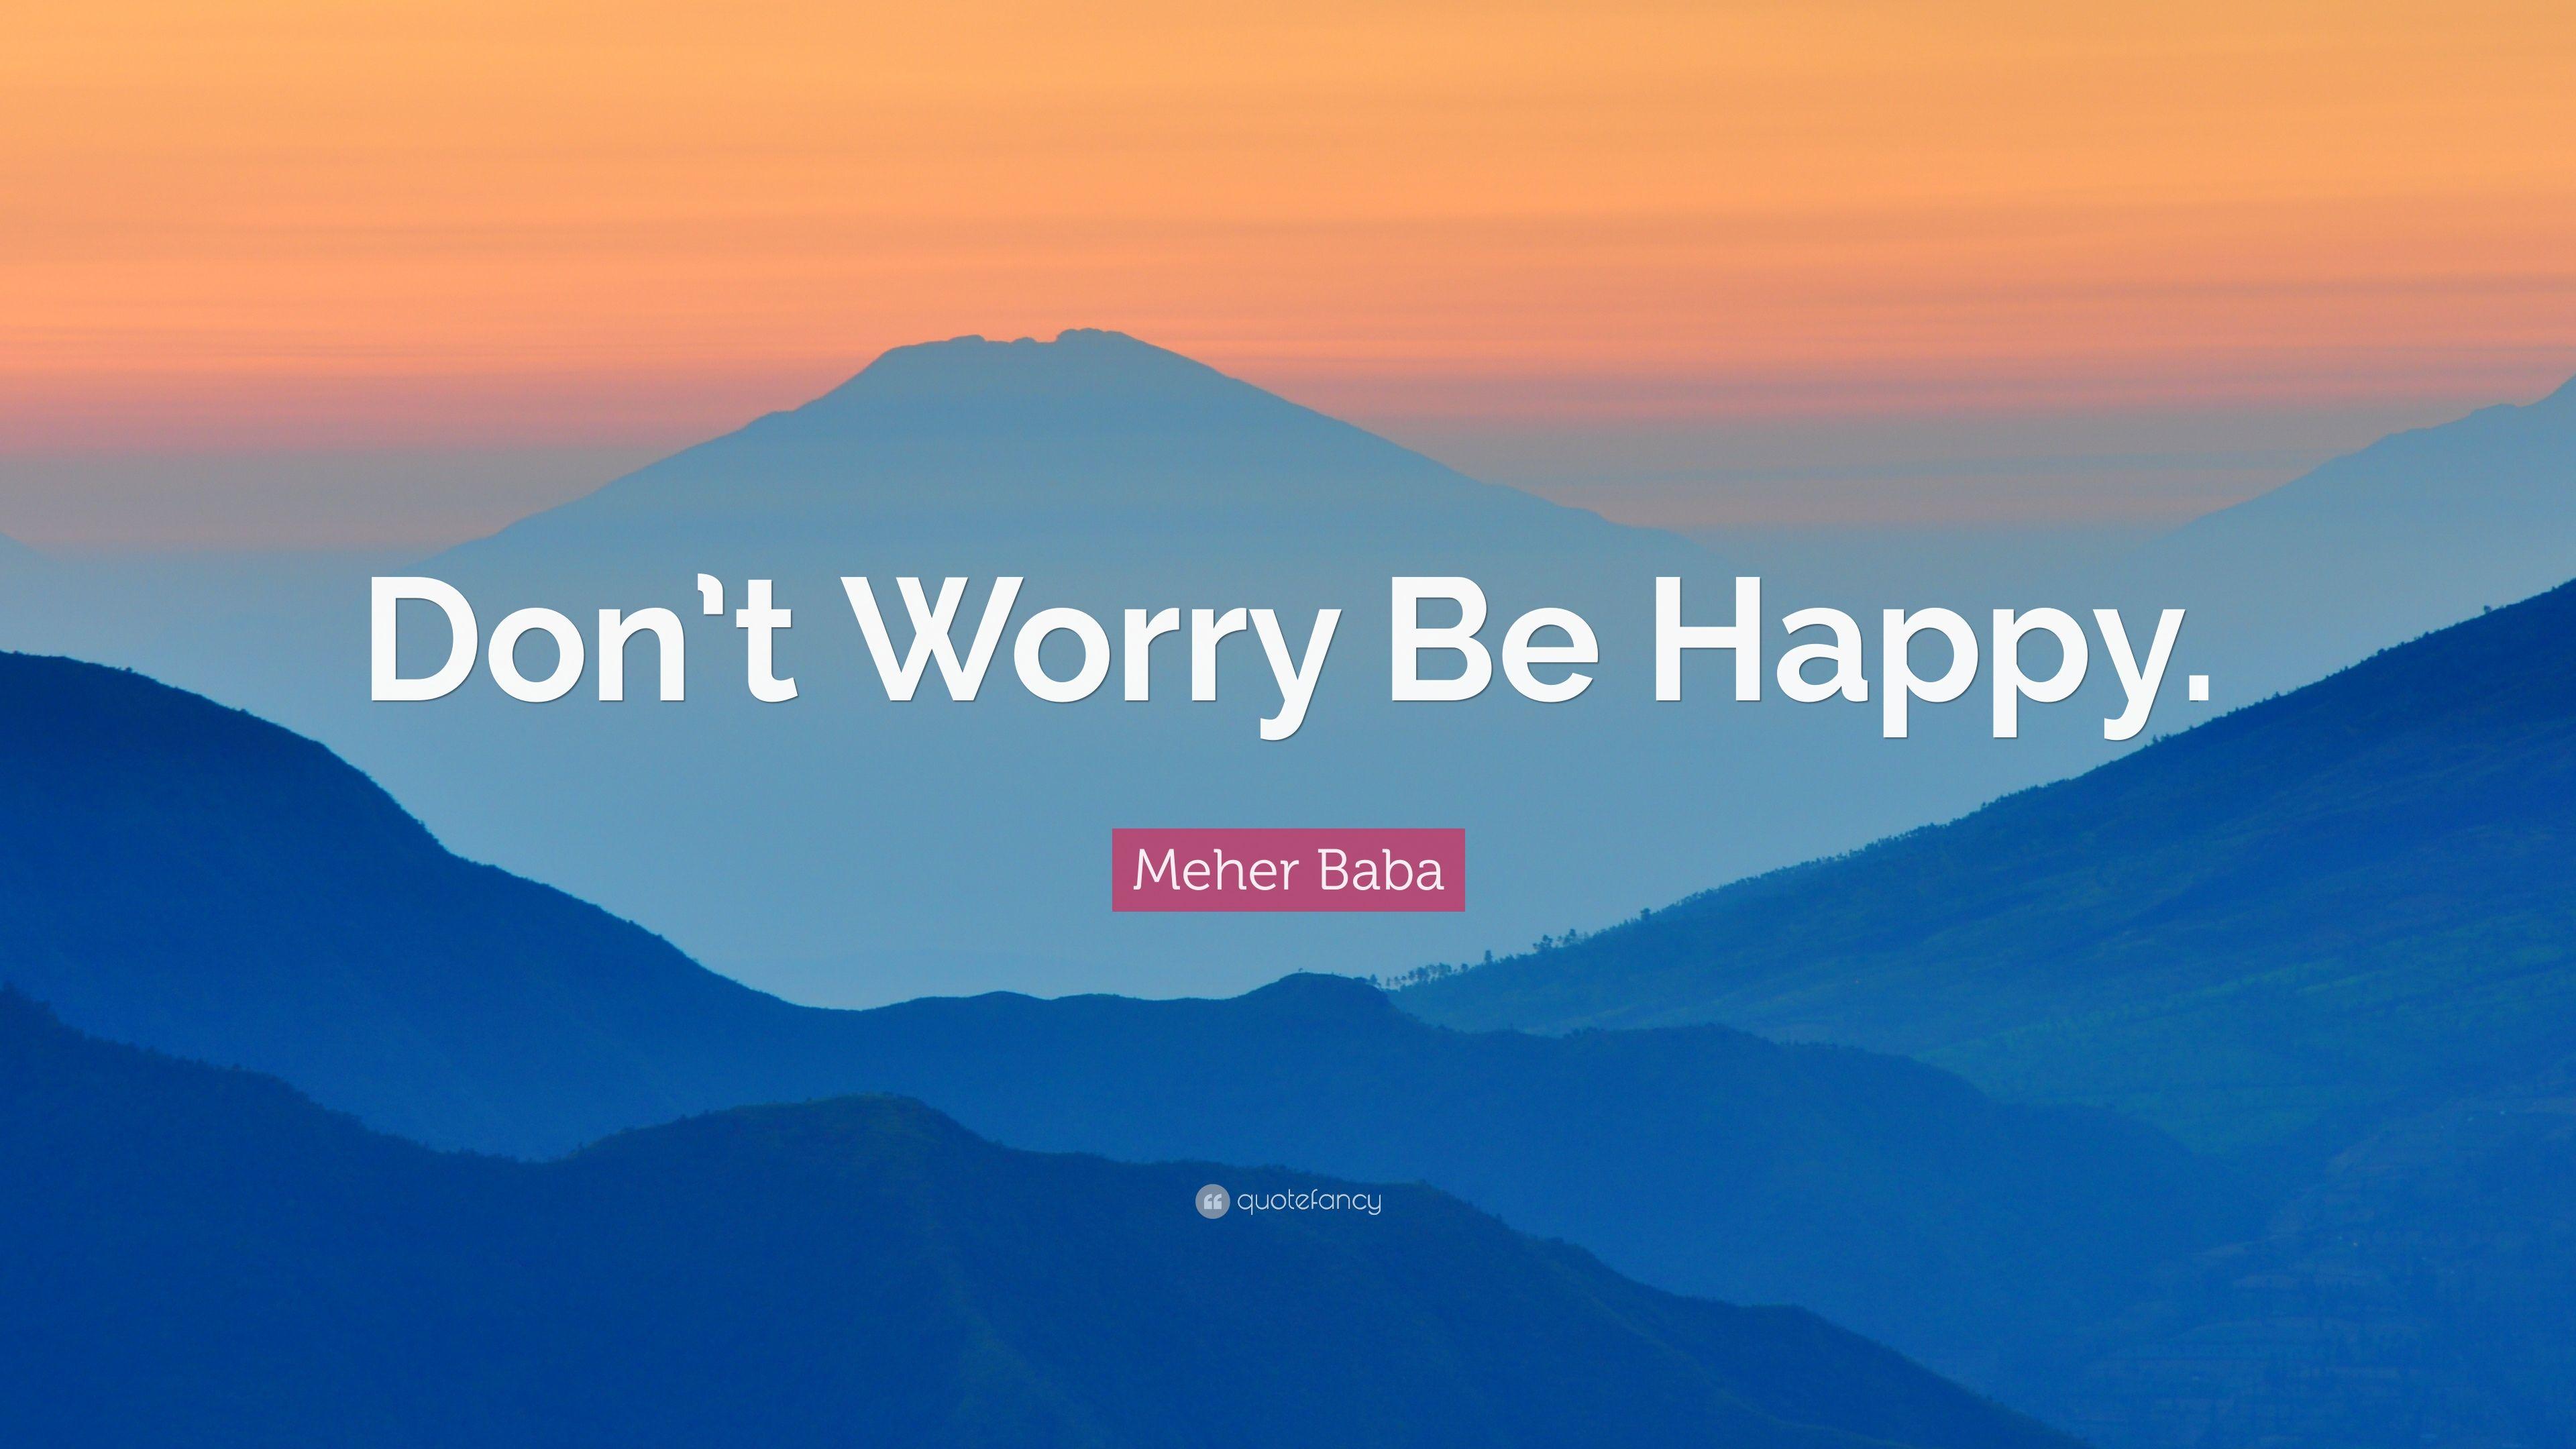 Meher Baba Quote: “Don't Worry Be Happy.” (12 wallpaper)